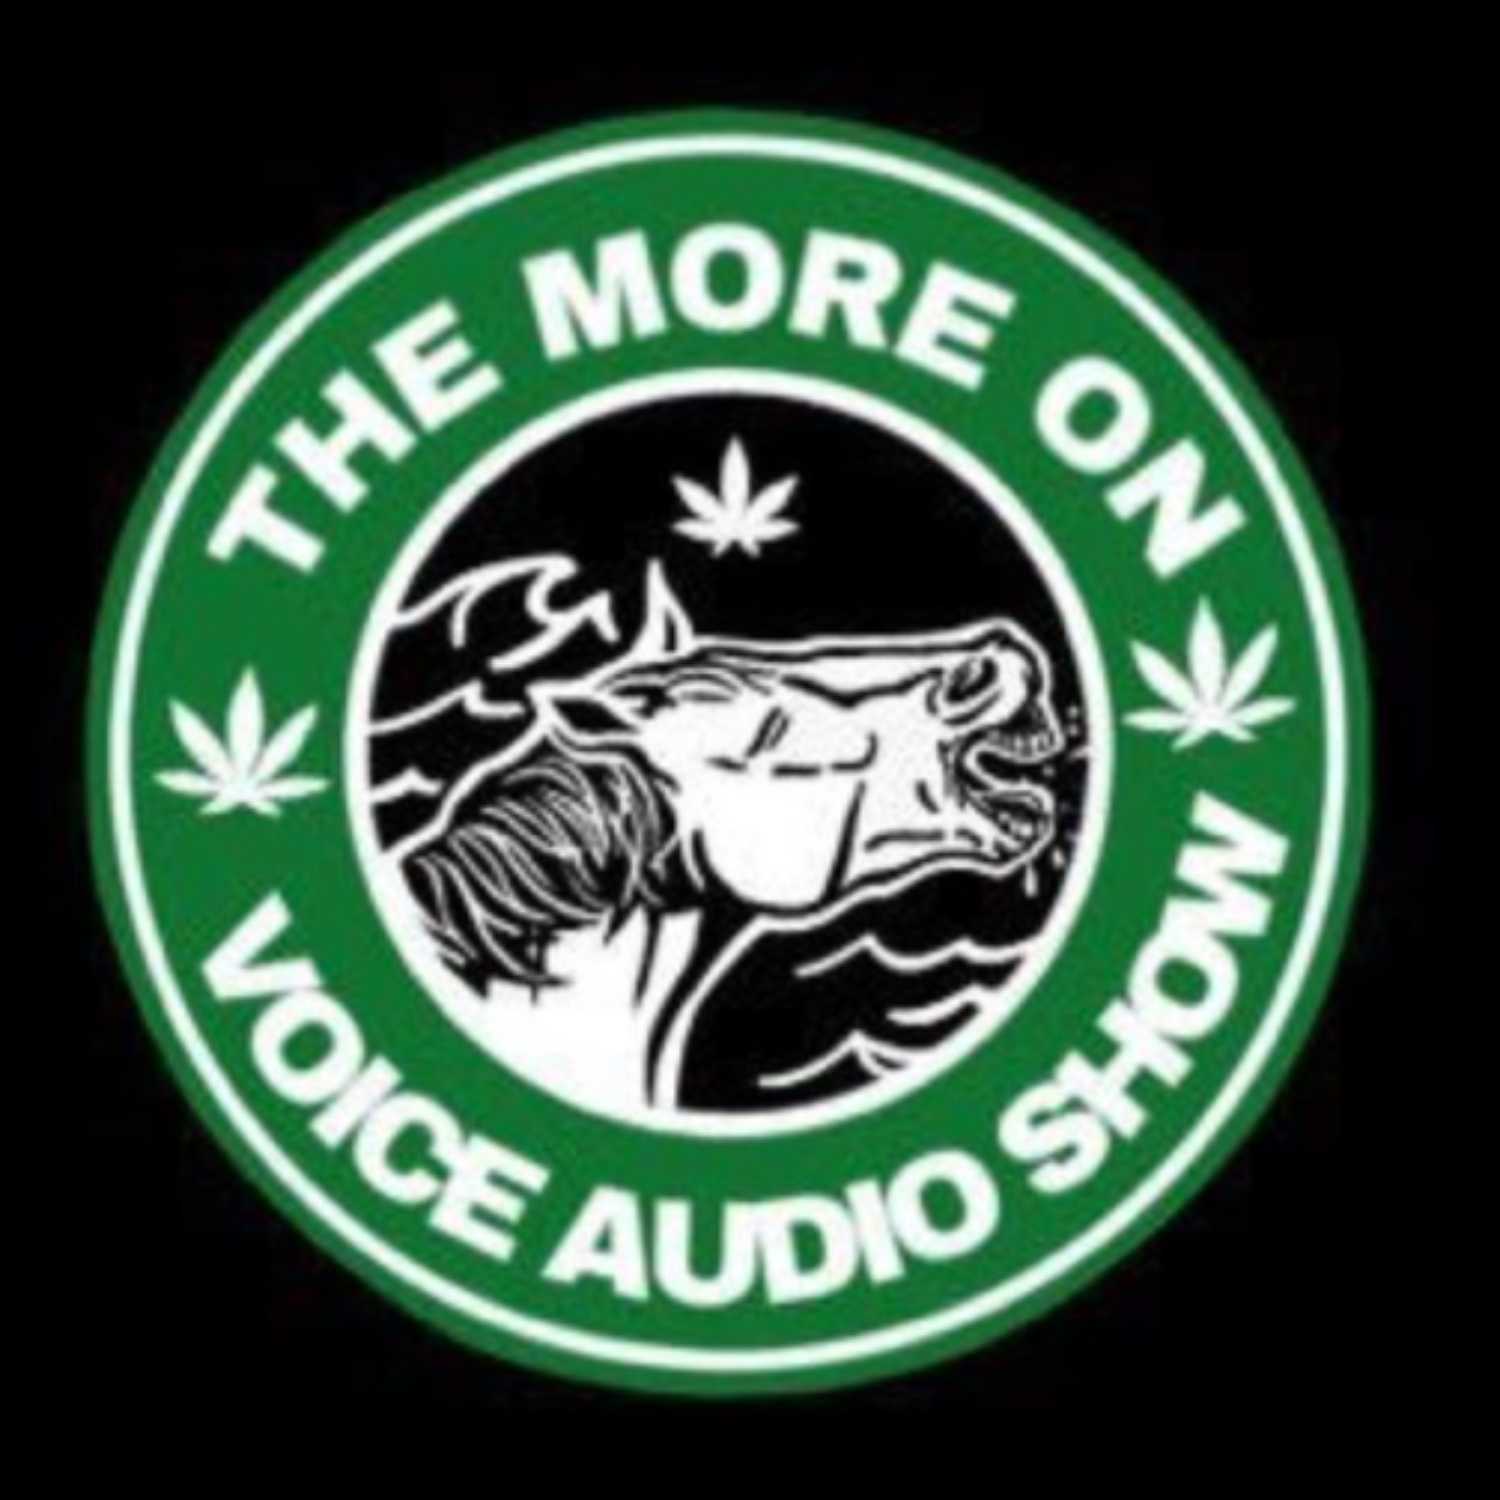 The More On Voice Audio Show: Episode 49